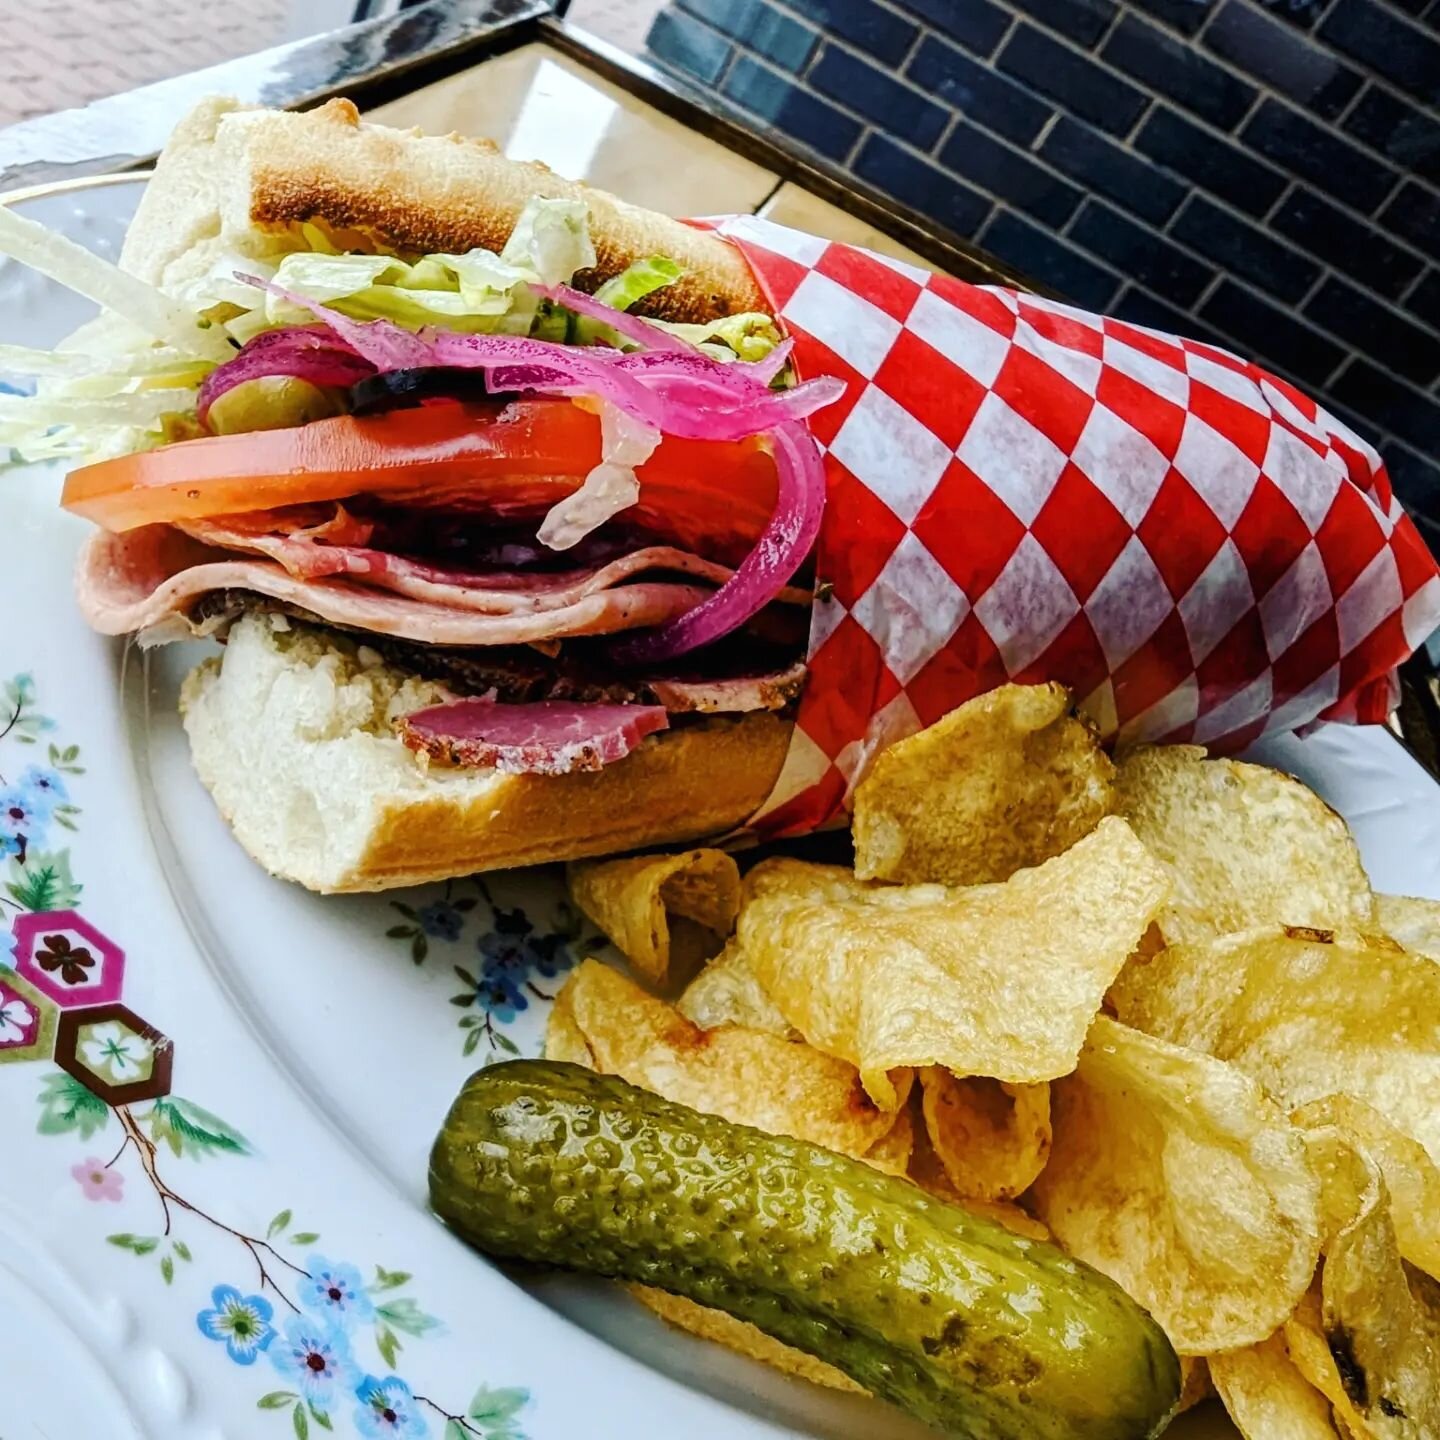 On the menu this week...

Italian Hero Sandwiches with @chinchedmeats !
Street Corn
LA Dogs
Charcuterie
Chips with house made guacamole and salsa 

Drop down, we are open until 10 pm tonight.

Grab this big boy sando with chips and beer for just $25 